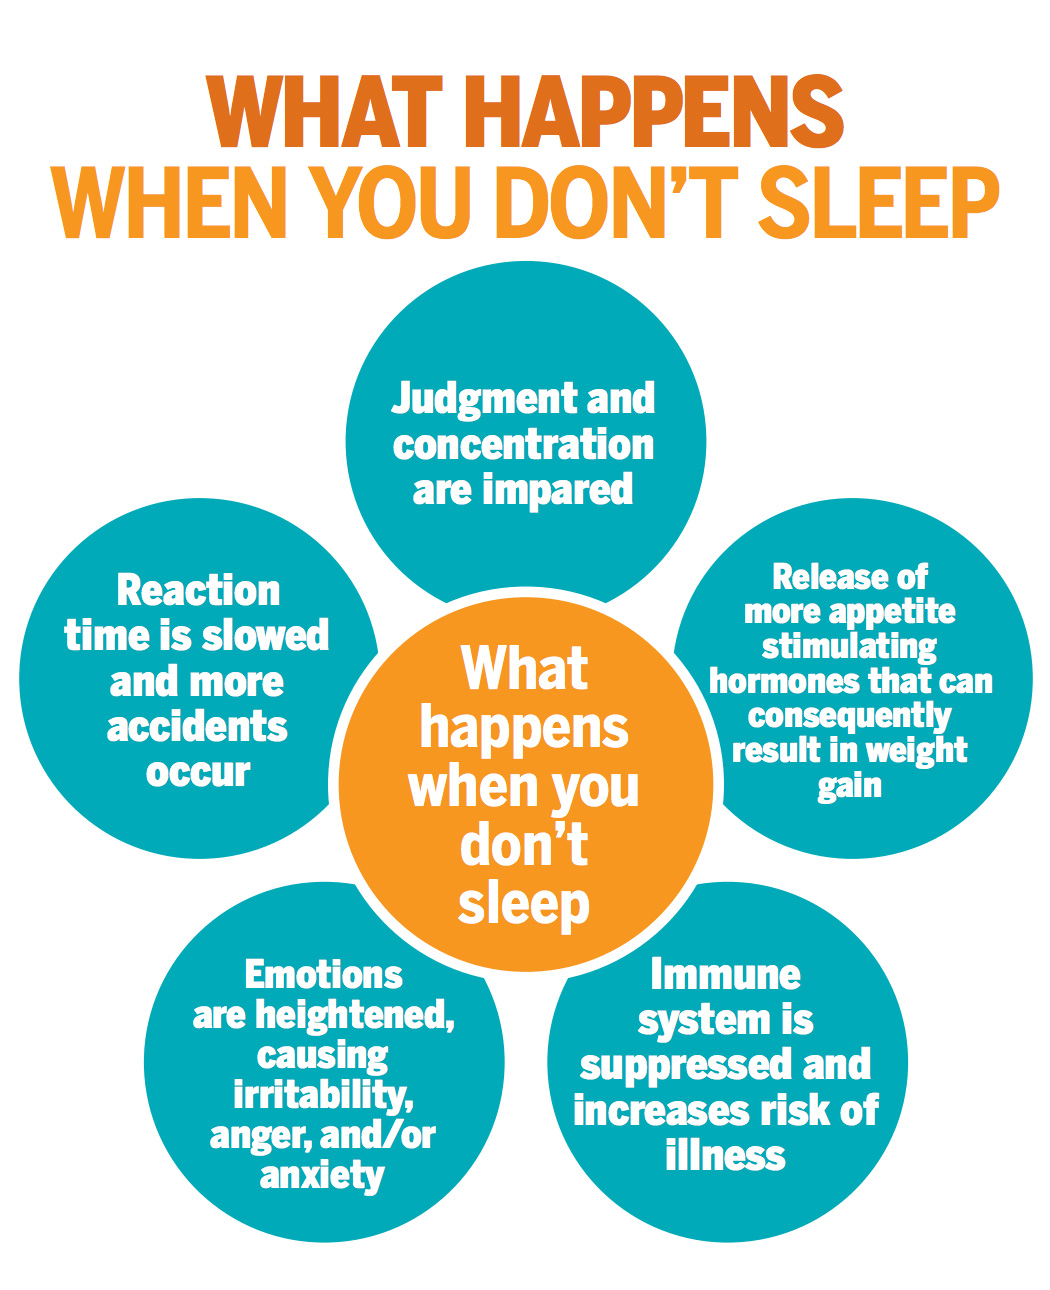 What happens when you don’t sleep.
Judgment and concentration are impaired.
Release of more appetite stimulating hormones that can consequently result in weight gain.
Immune system is suppressed and increases risk of illness.
Emotions are heightened, causing irritability, anger, and or anxiety.
Reaction time is slowed and more accidents occur.